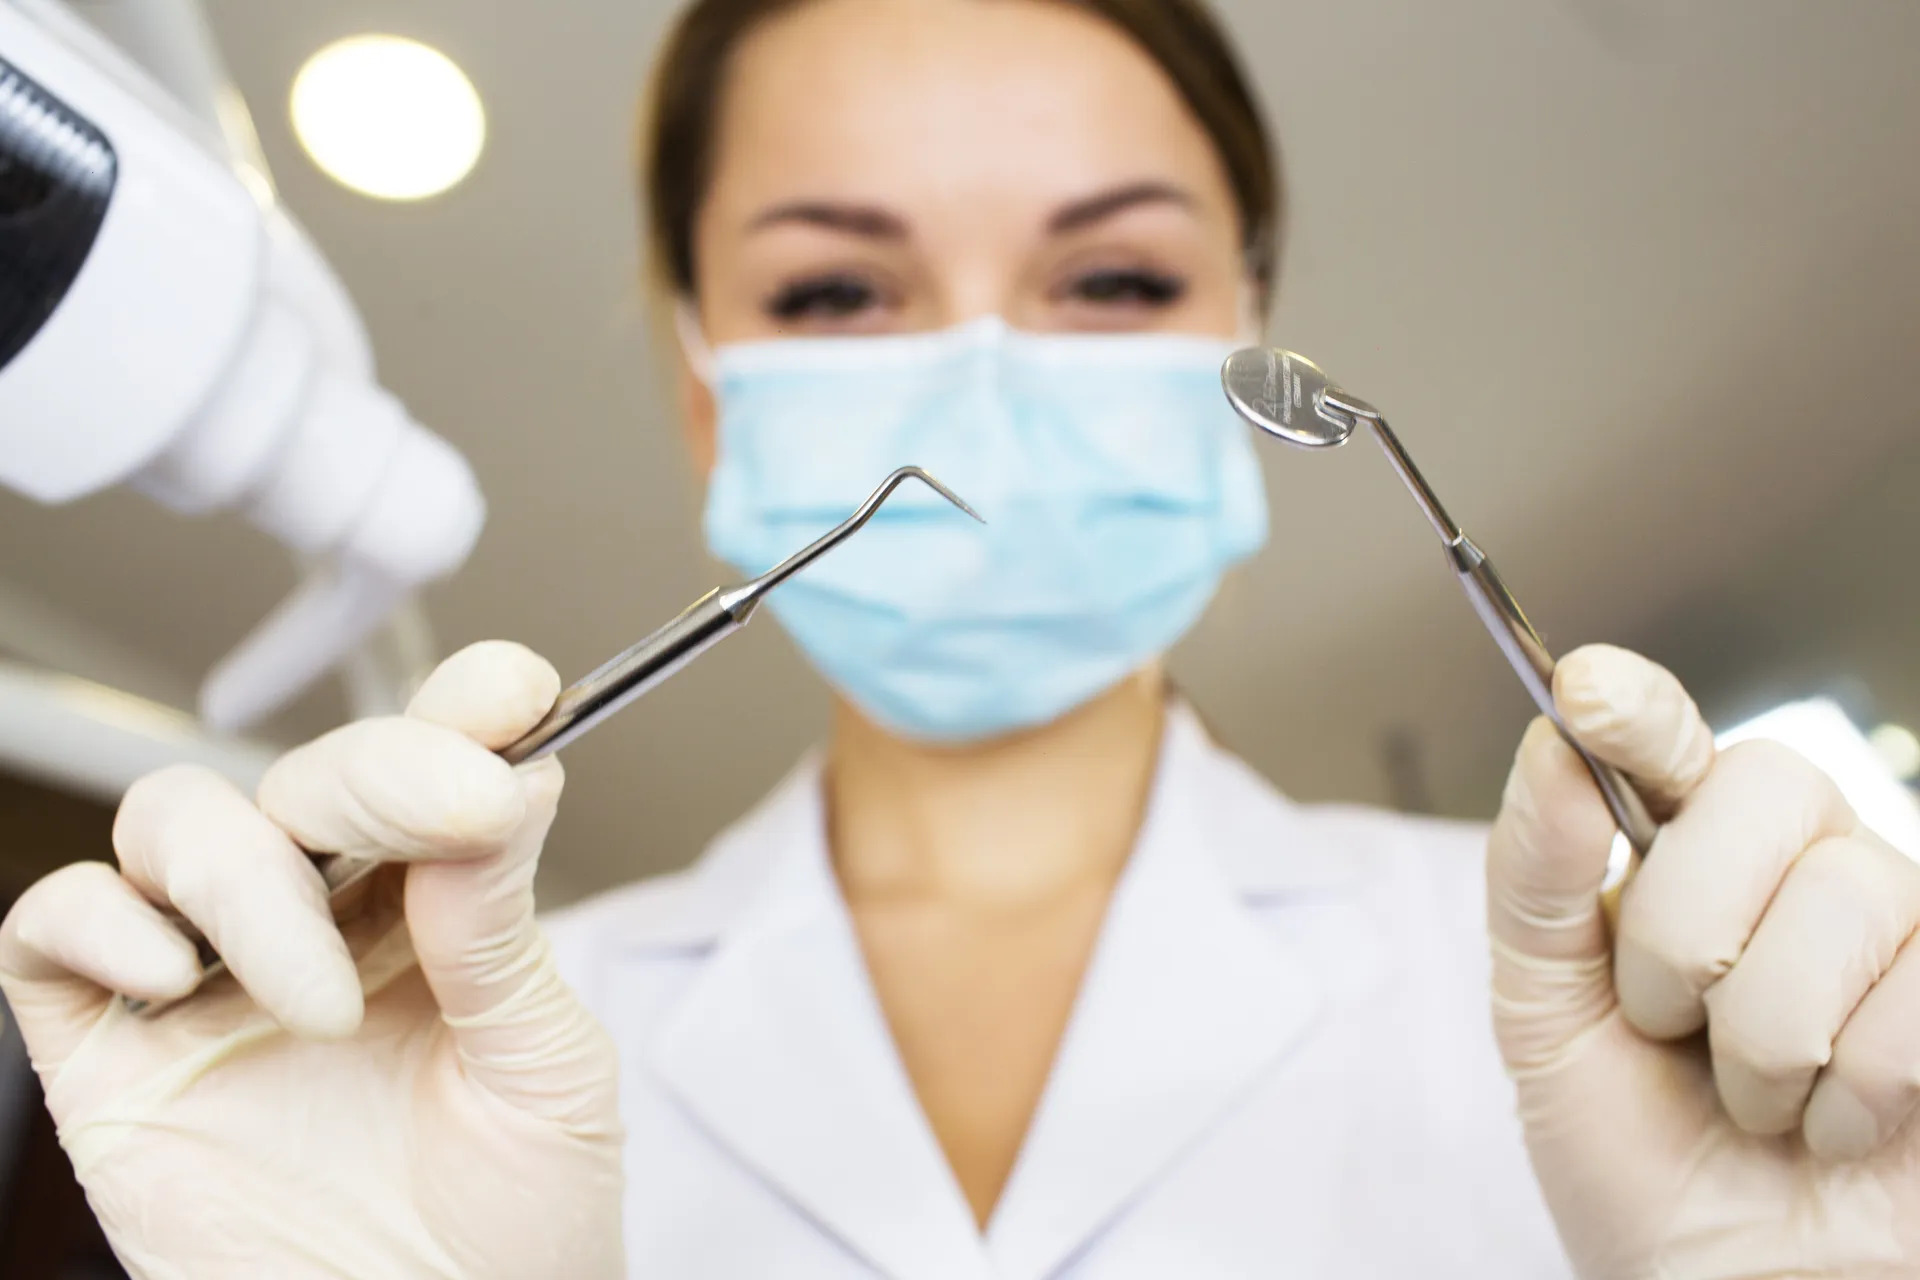 Routine Dental Exam and Cleaning – What Does It Include?